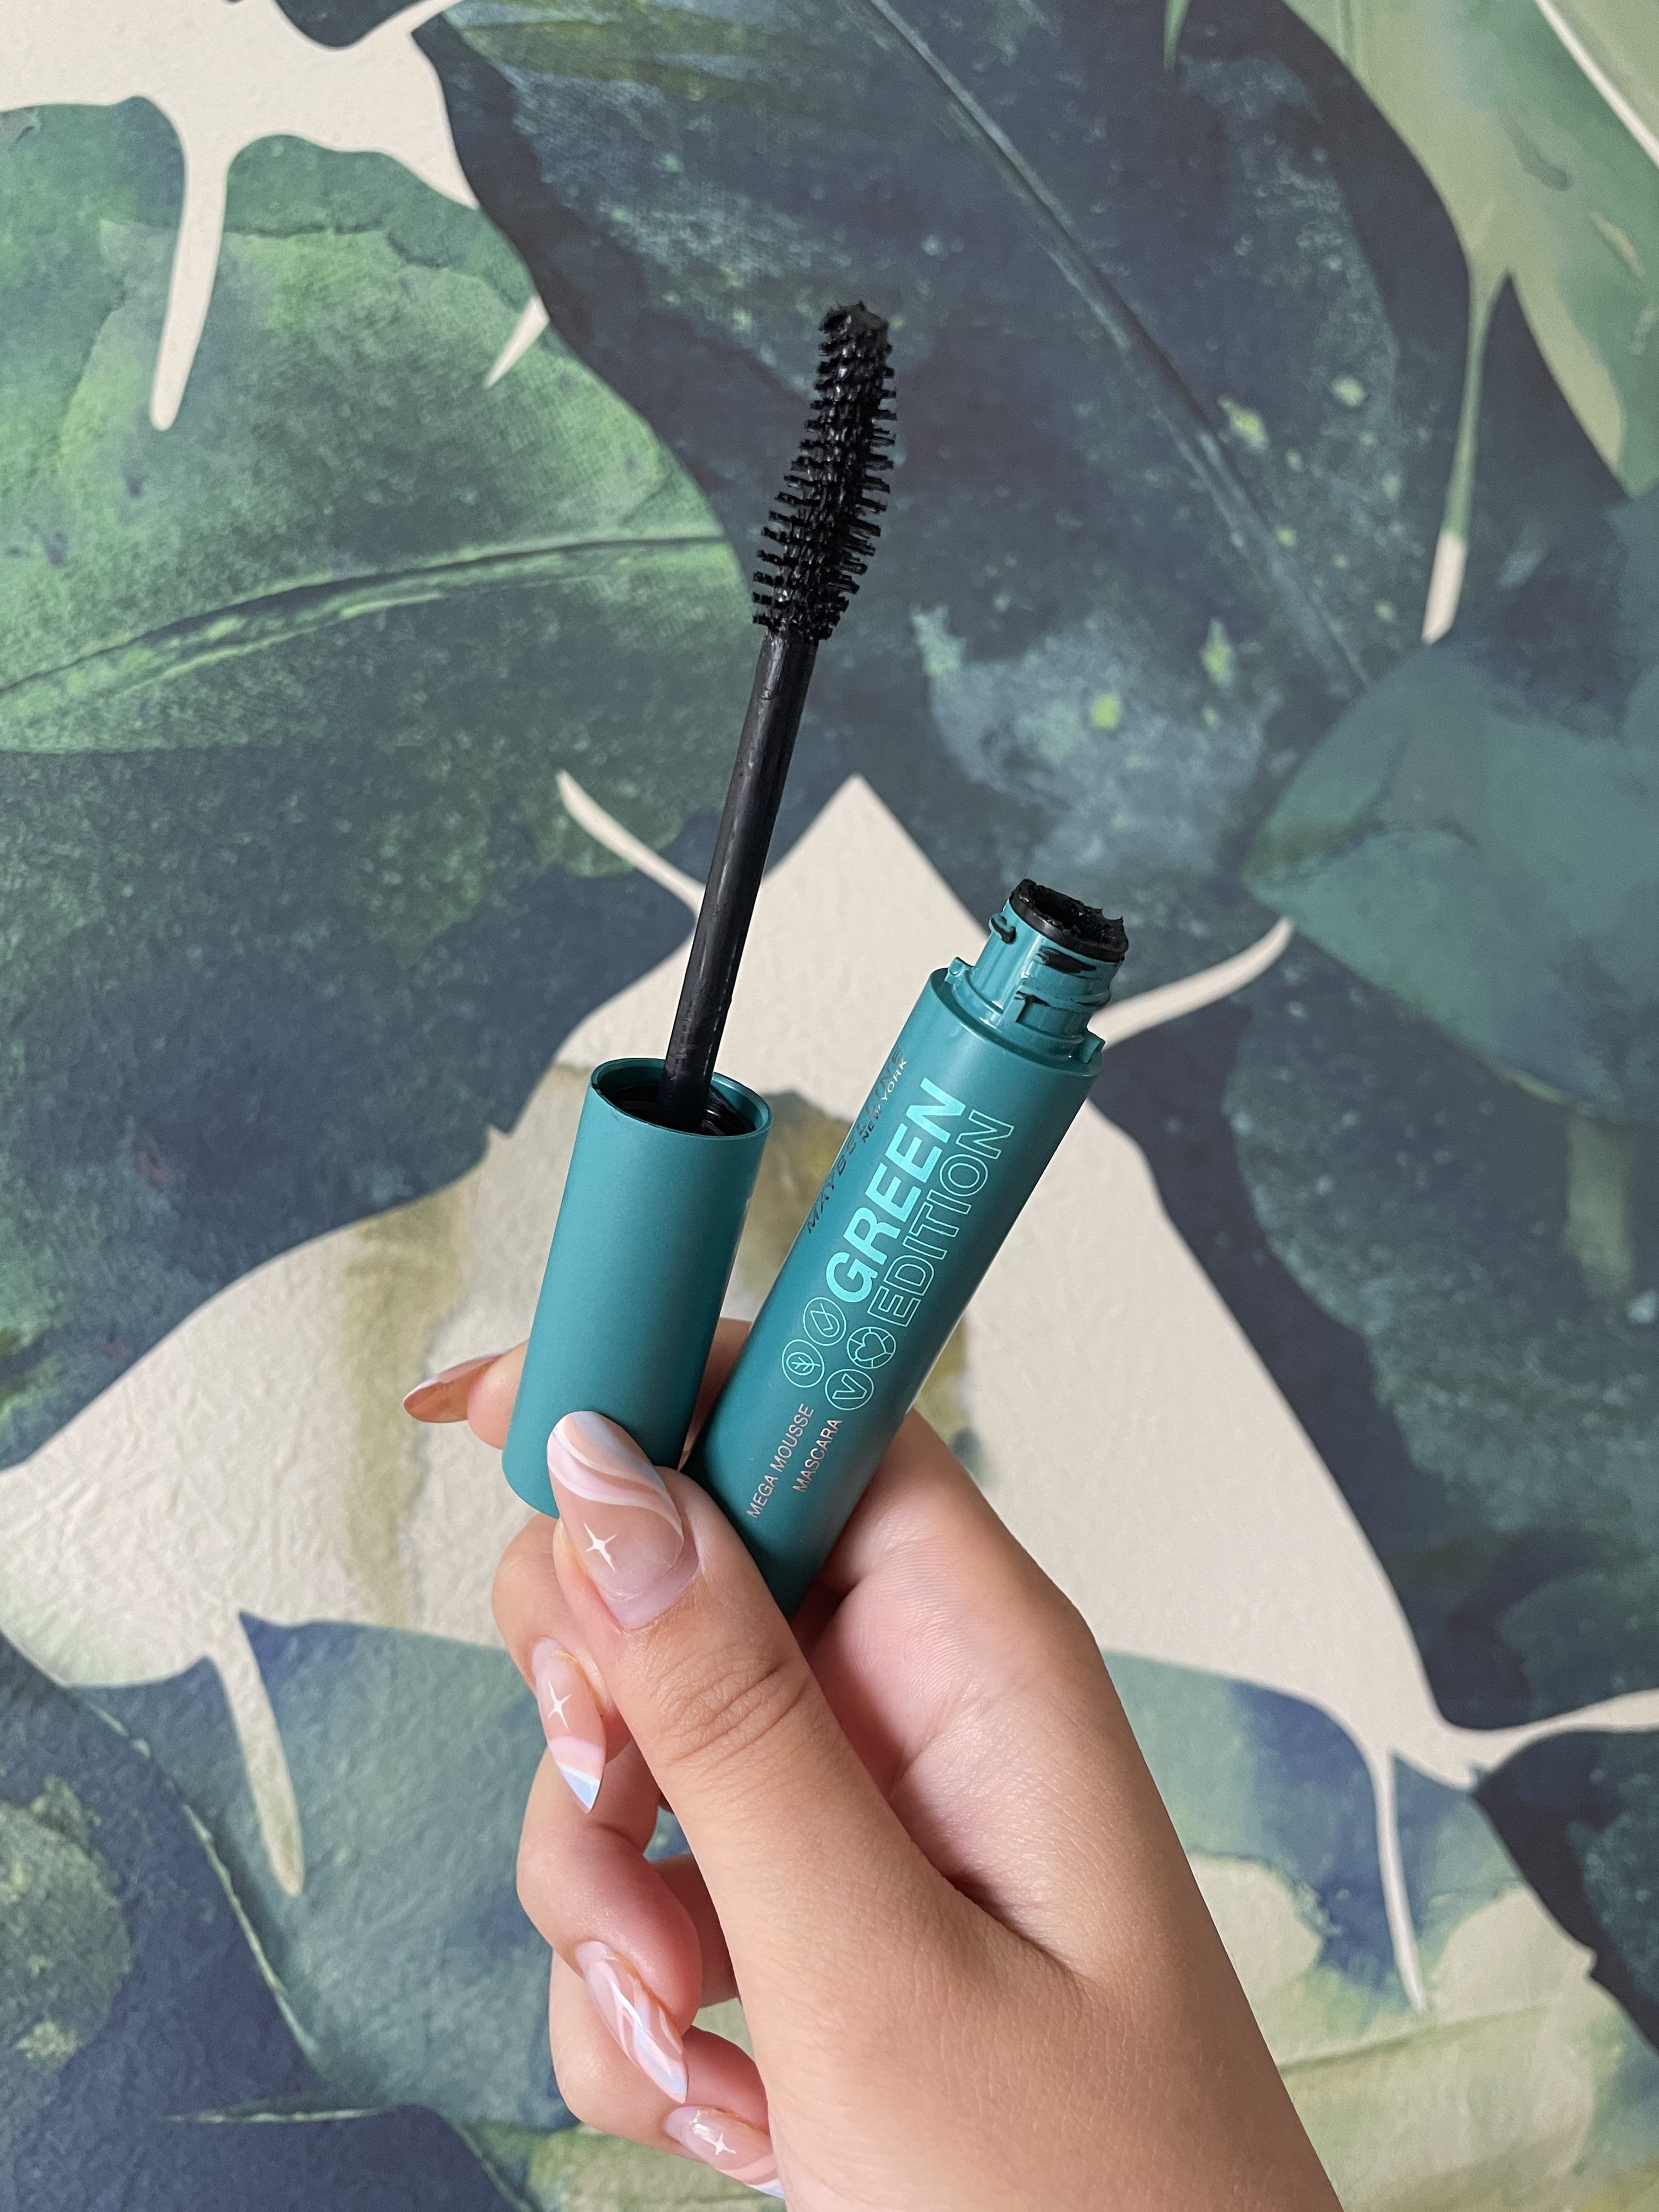 Maybelline Green Edition Mega Beauty Mousse Review POPSUGAR Mascara Photos + 